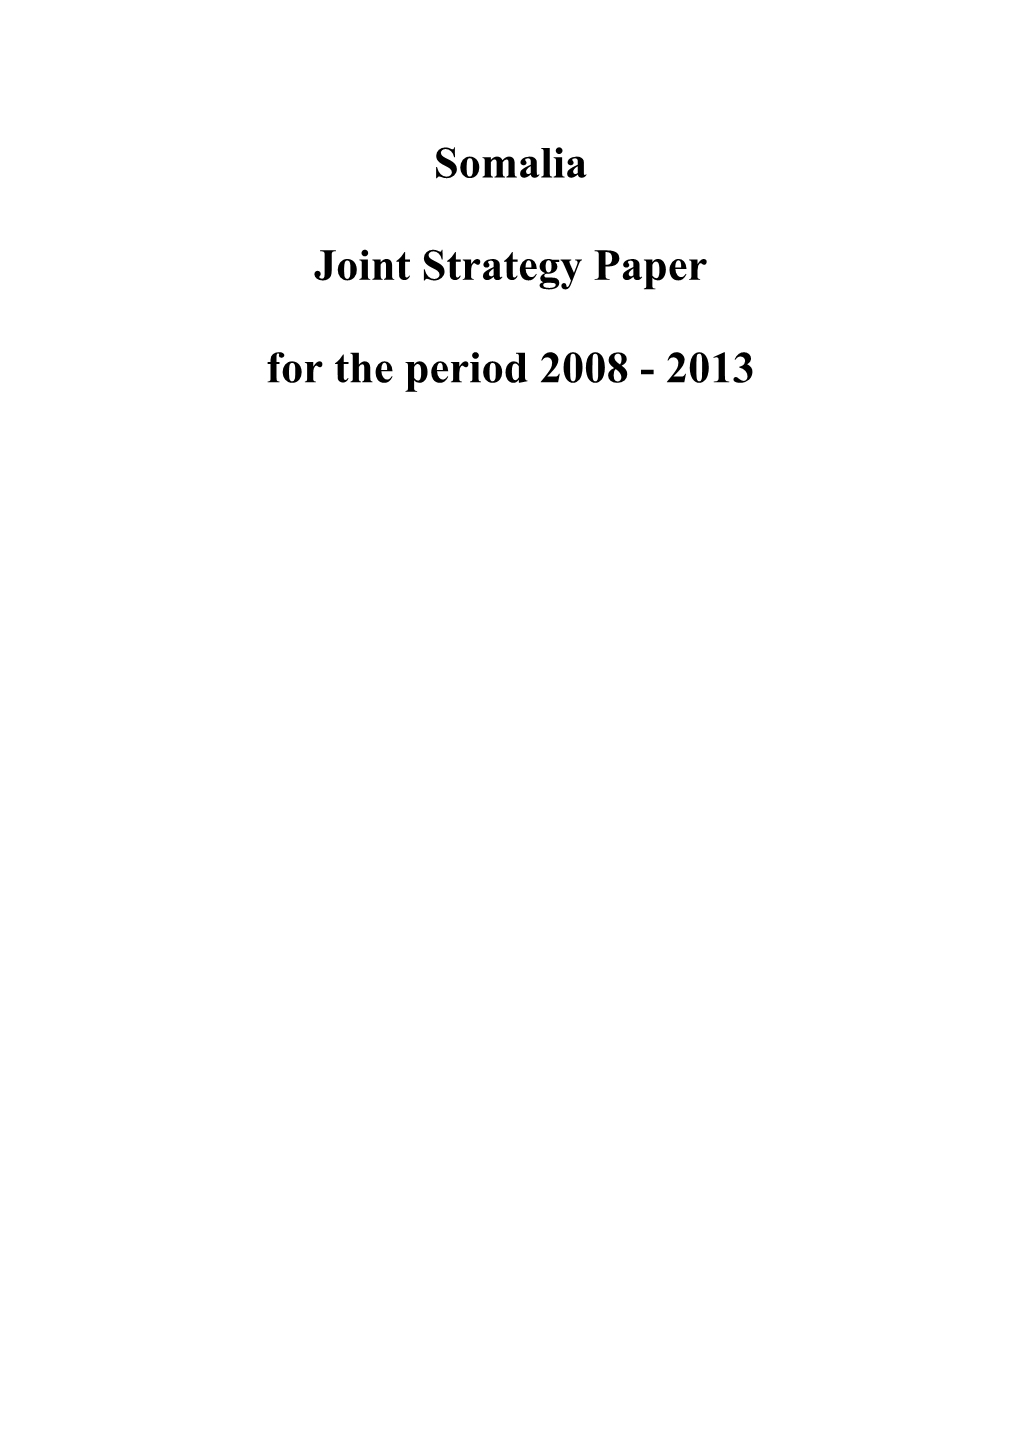 Somalia Joint Strategy Paper for the Period 2008